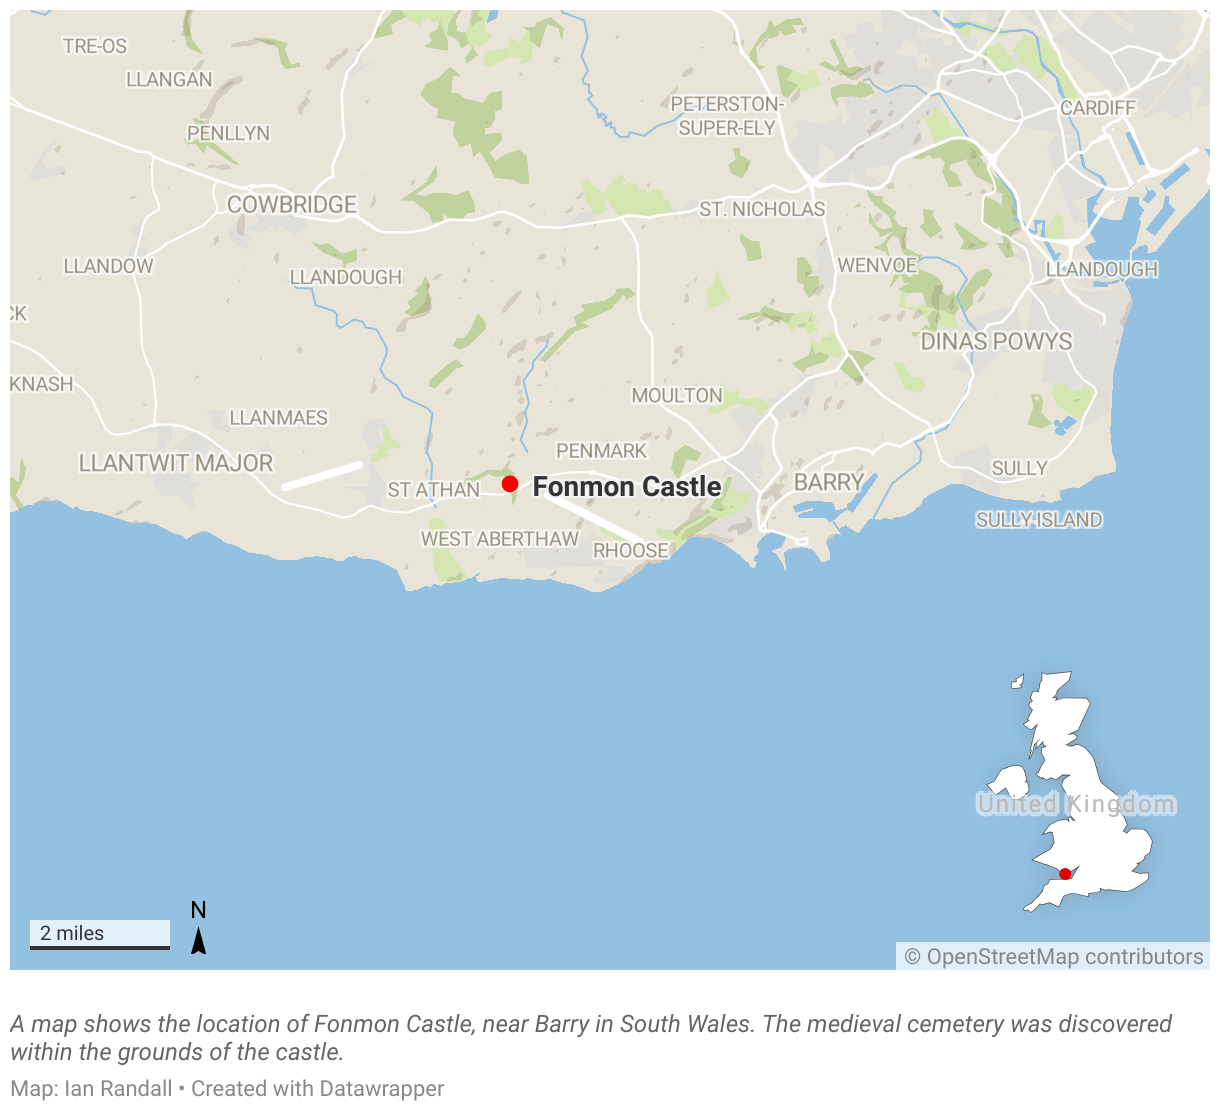 A map shows the location of Fonmon Castle, near Barry in South Wales.